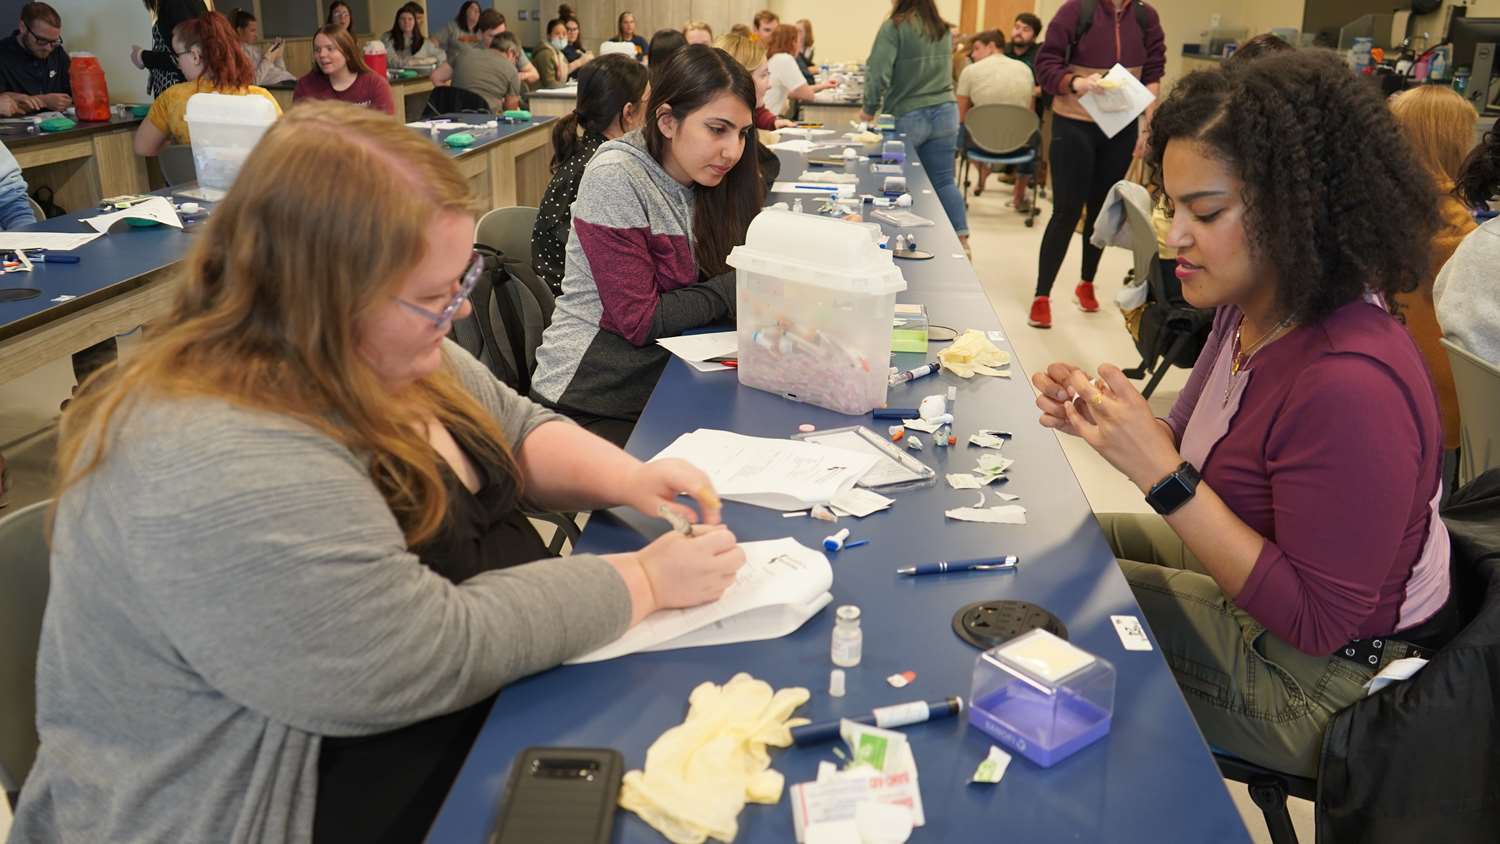 The Compounding Lab shows lab style tables where students are seated and participating in glucose training.